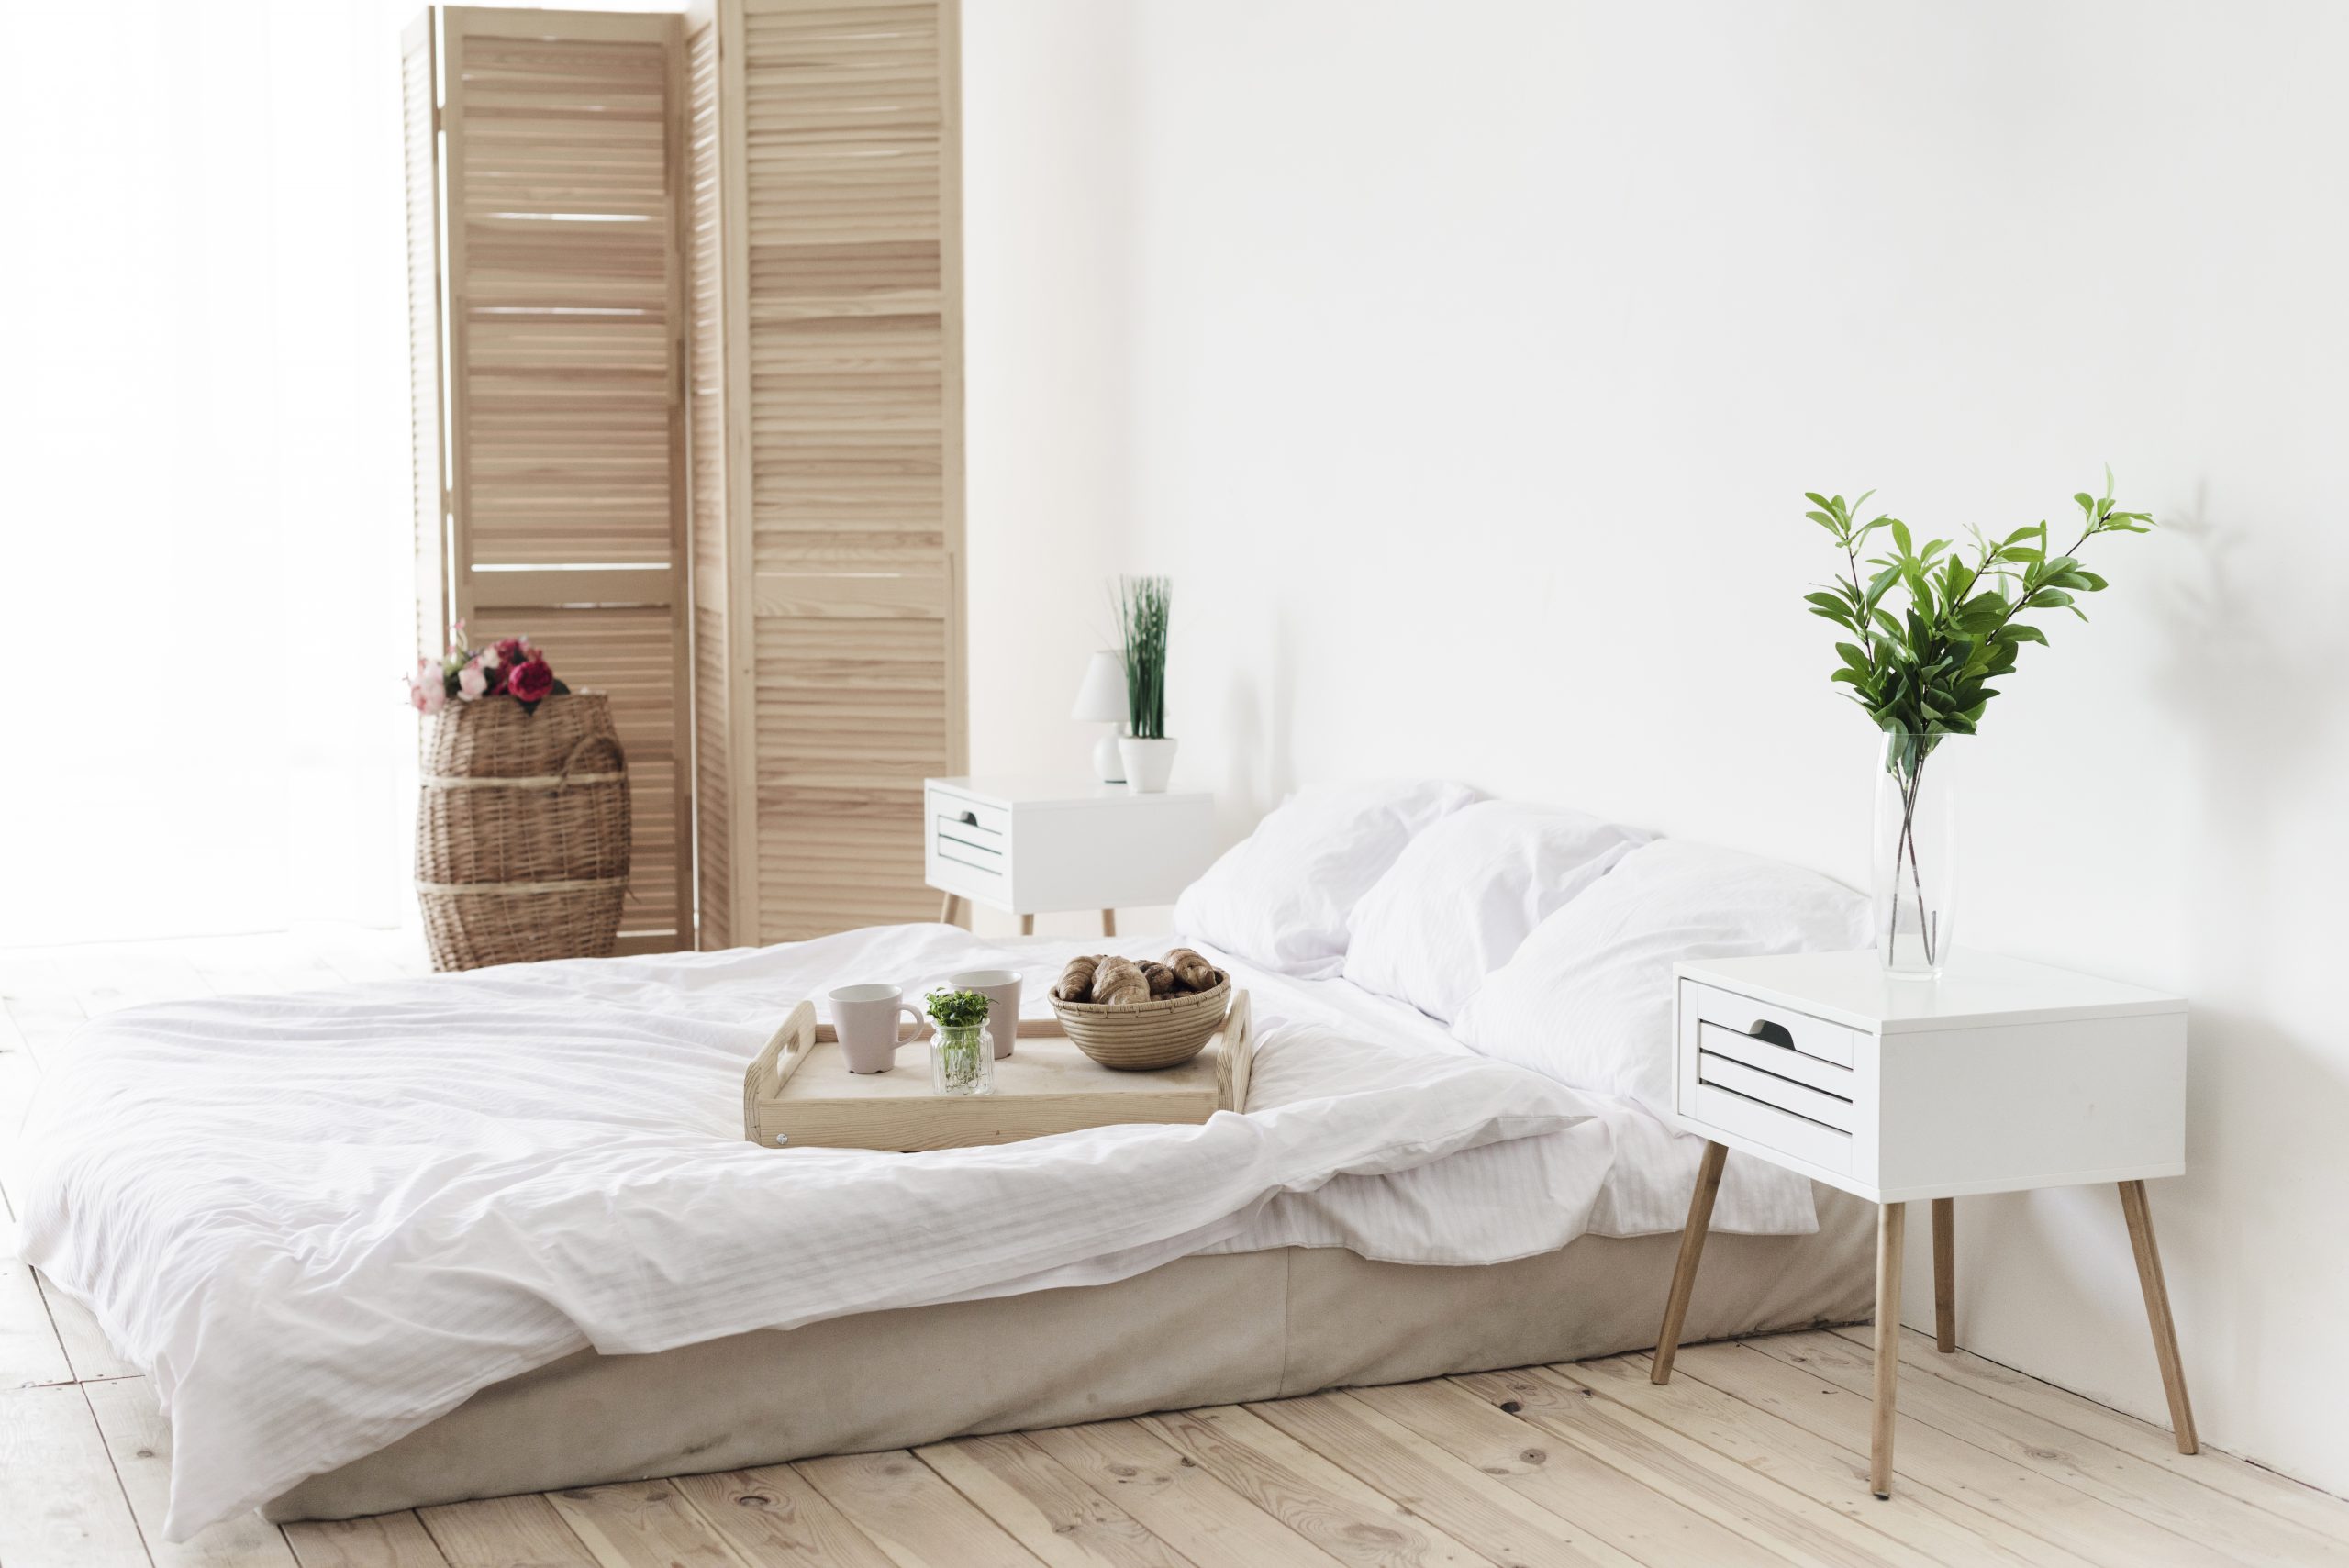 Scandinavia in the bedroom – what colors to choose?